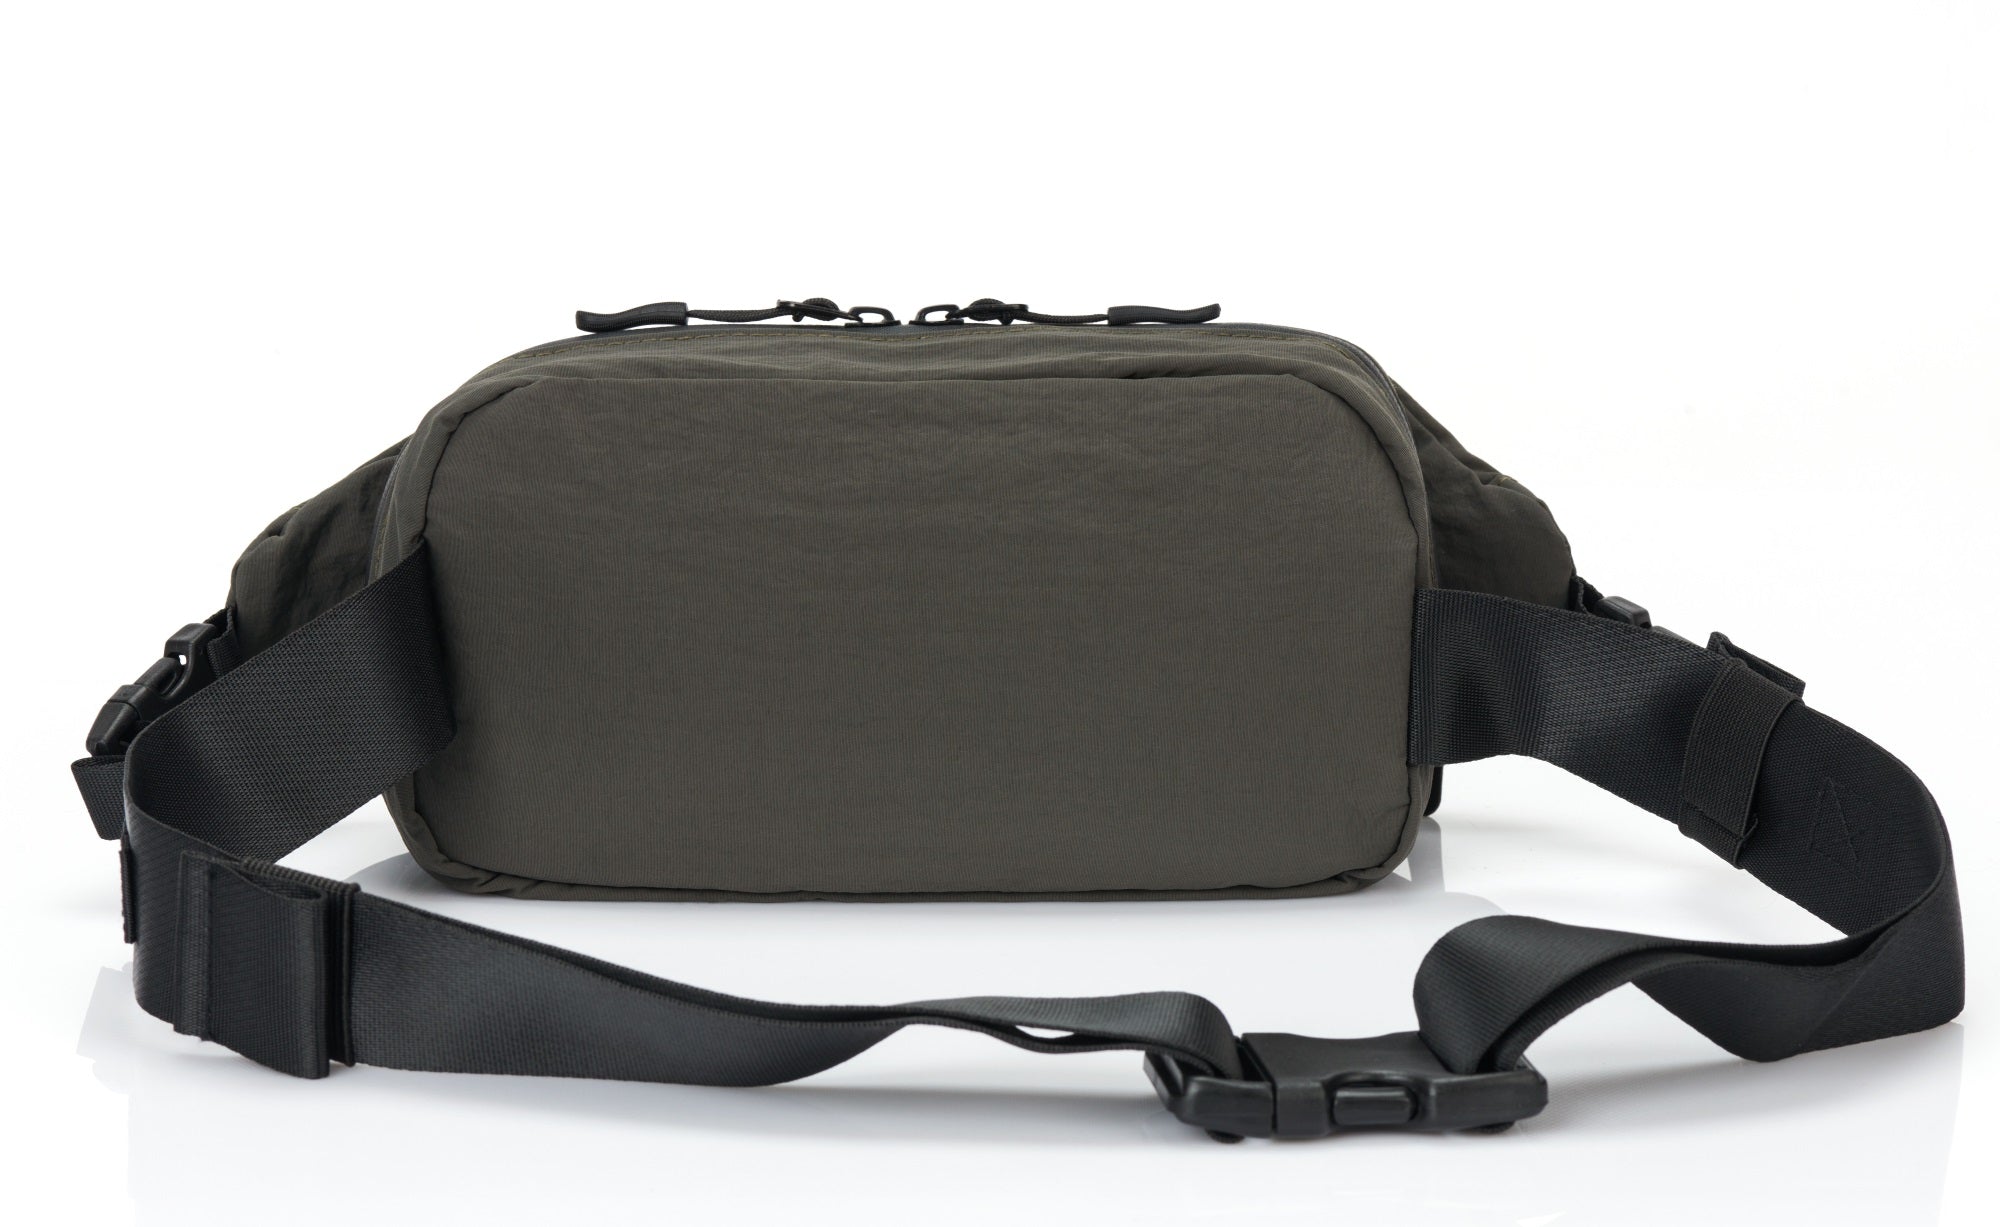  Male Sling Bag double strap